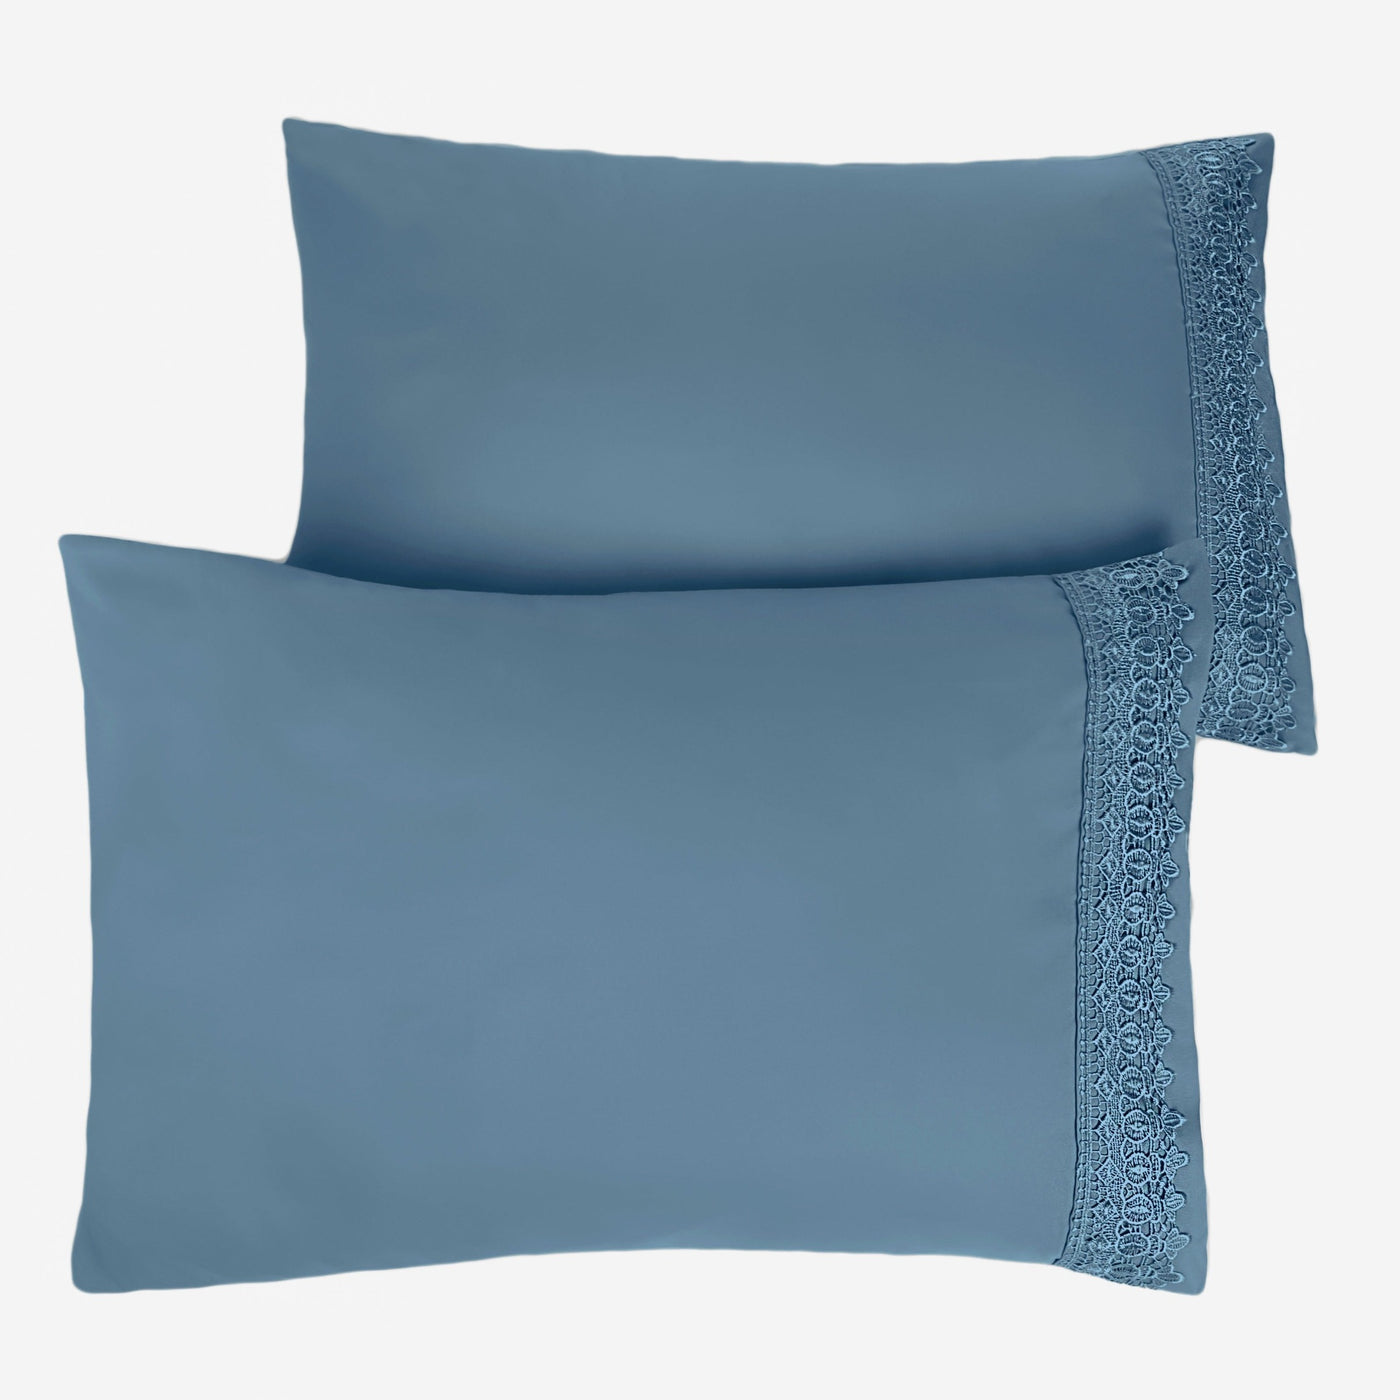 Two Vilano Lace Hem Pillow Cases in Coronet Blue Stack Together#color_vilano-coronet-blue